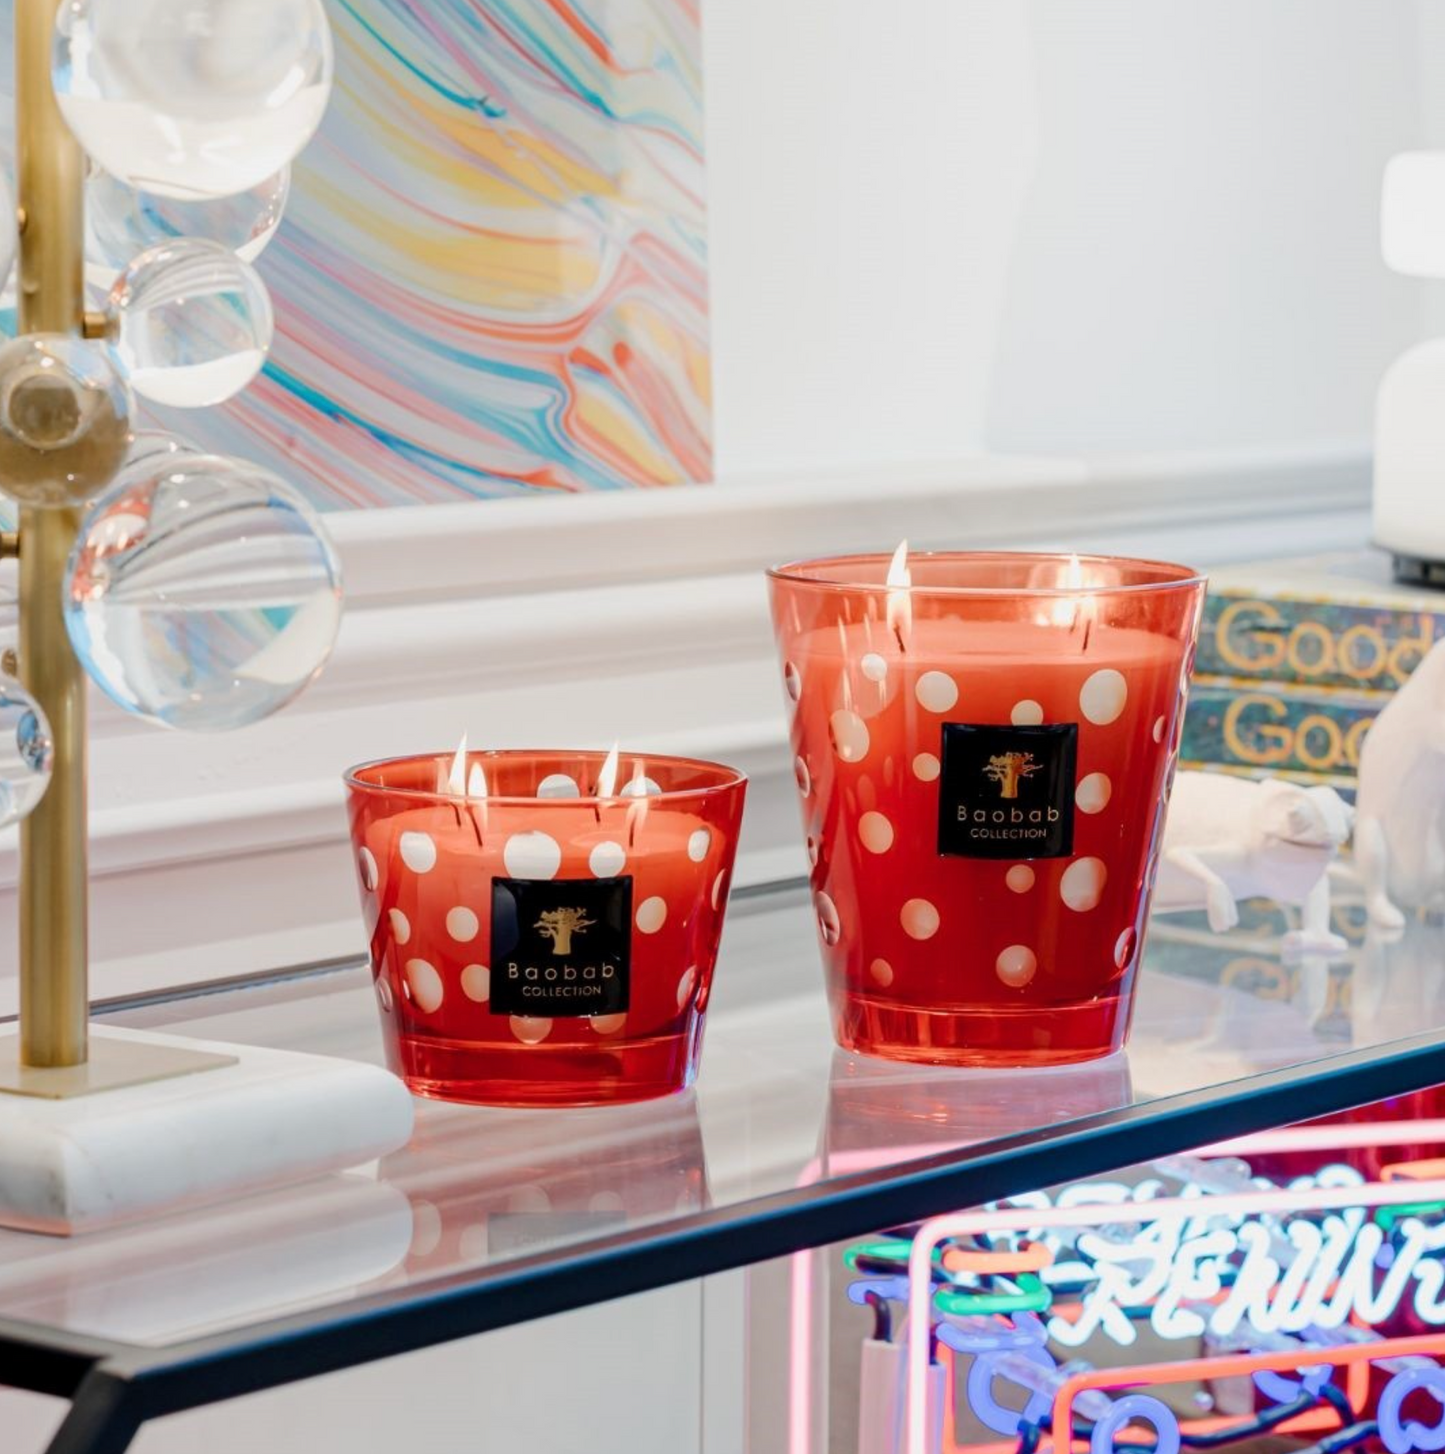 Red Bubbles Candle